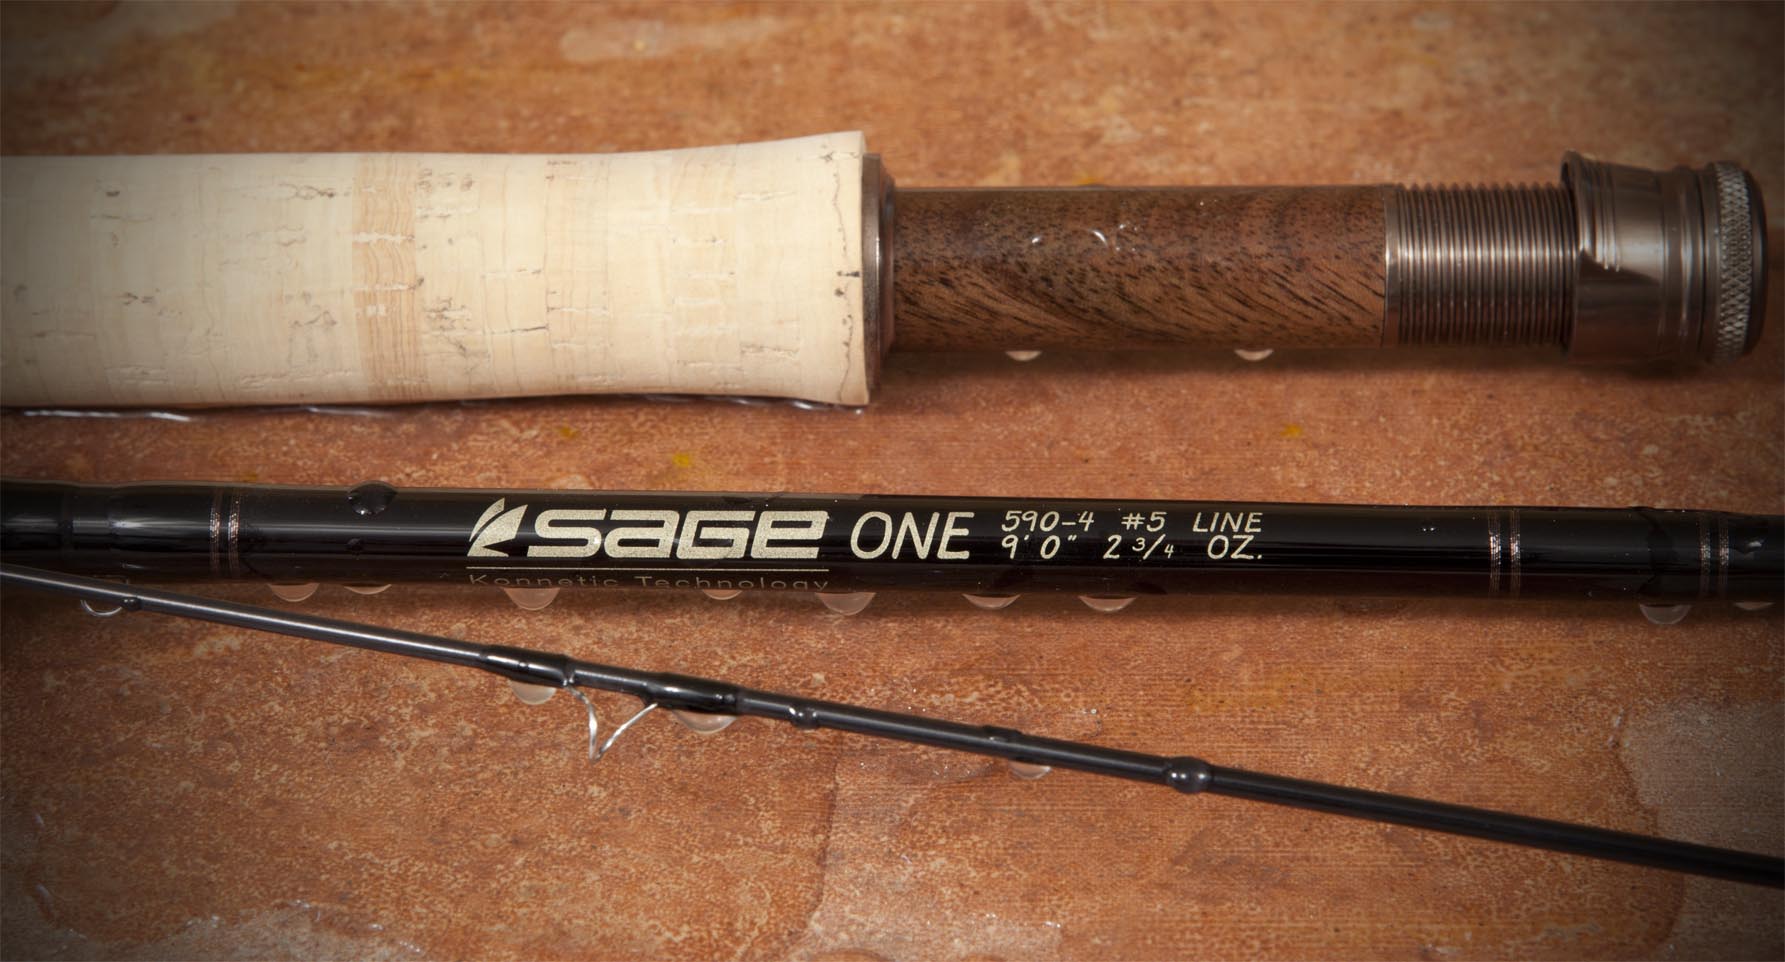 Big Sage One Fly Rod Sale! - Sweetwater Fly Shop